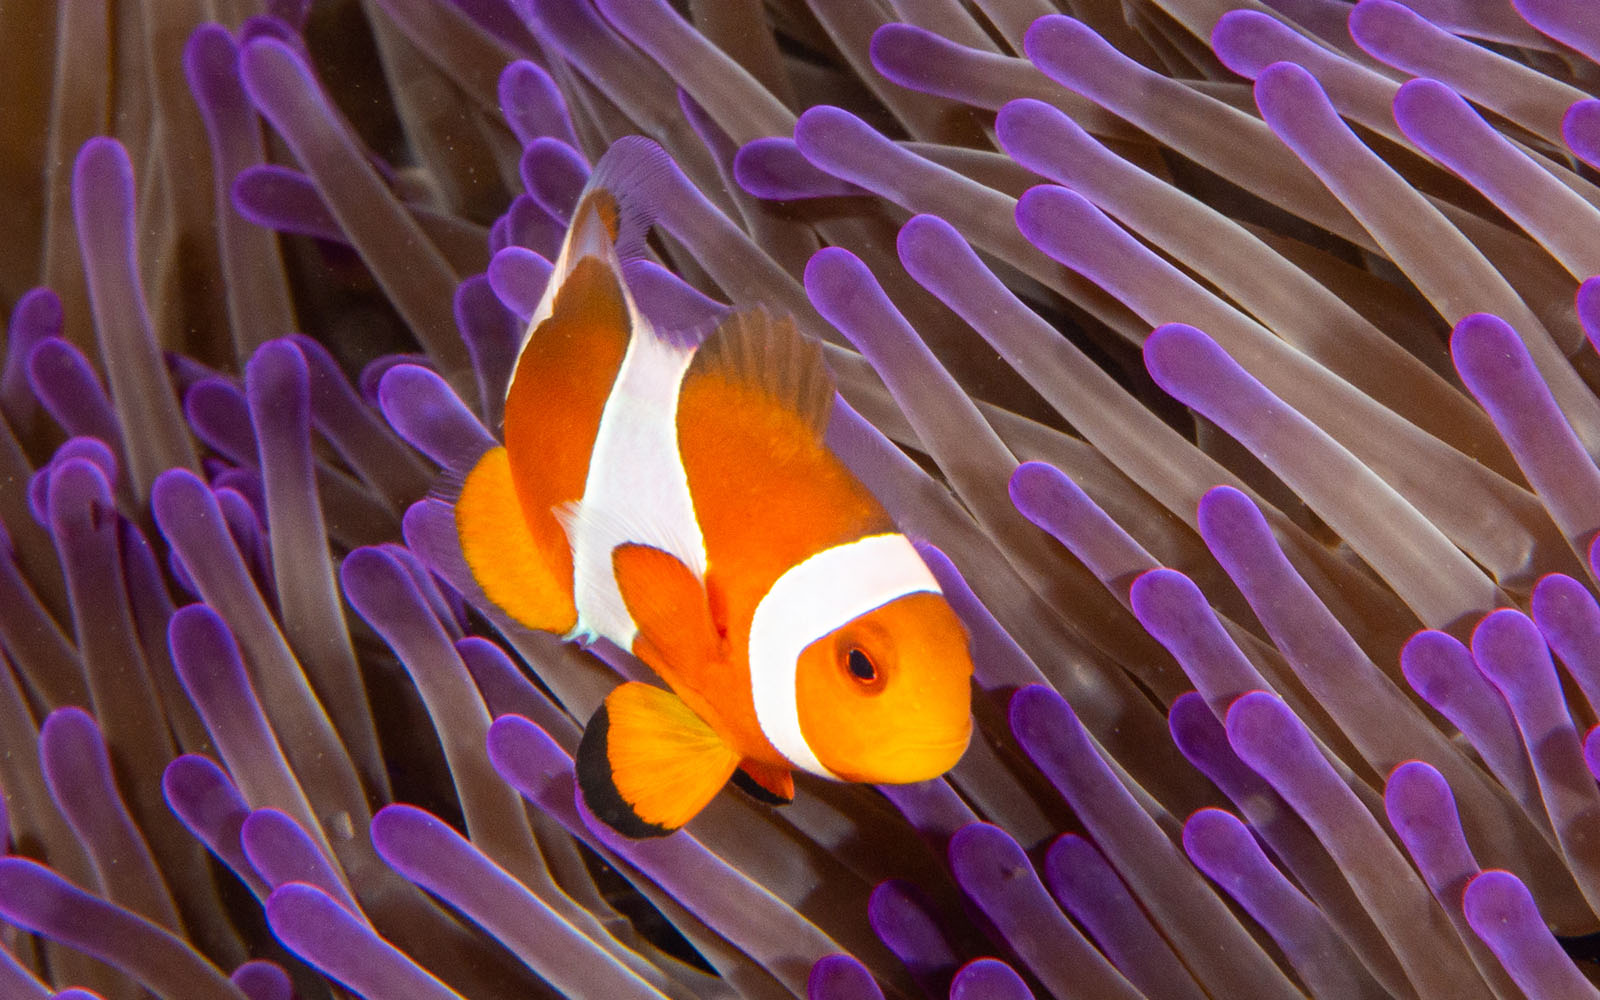 Clown anemonefish photographed by Snorkel Vacations on a snorkeling trip to Raja Ampat